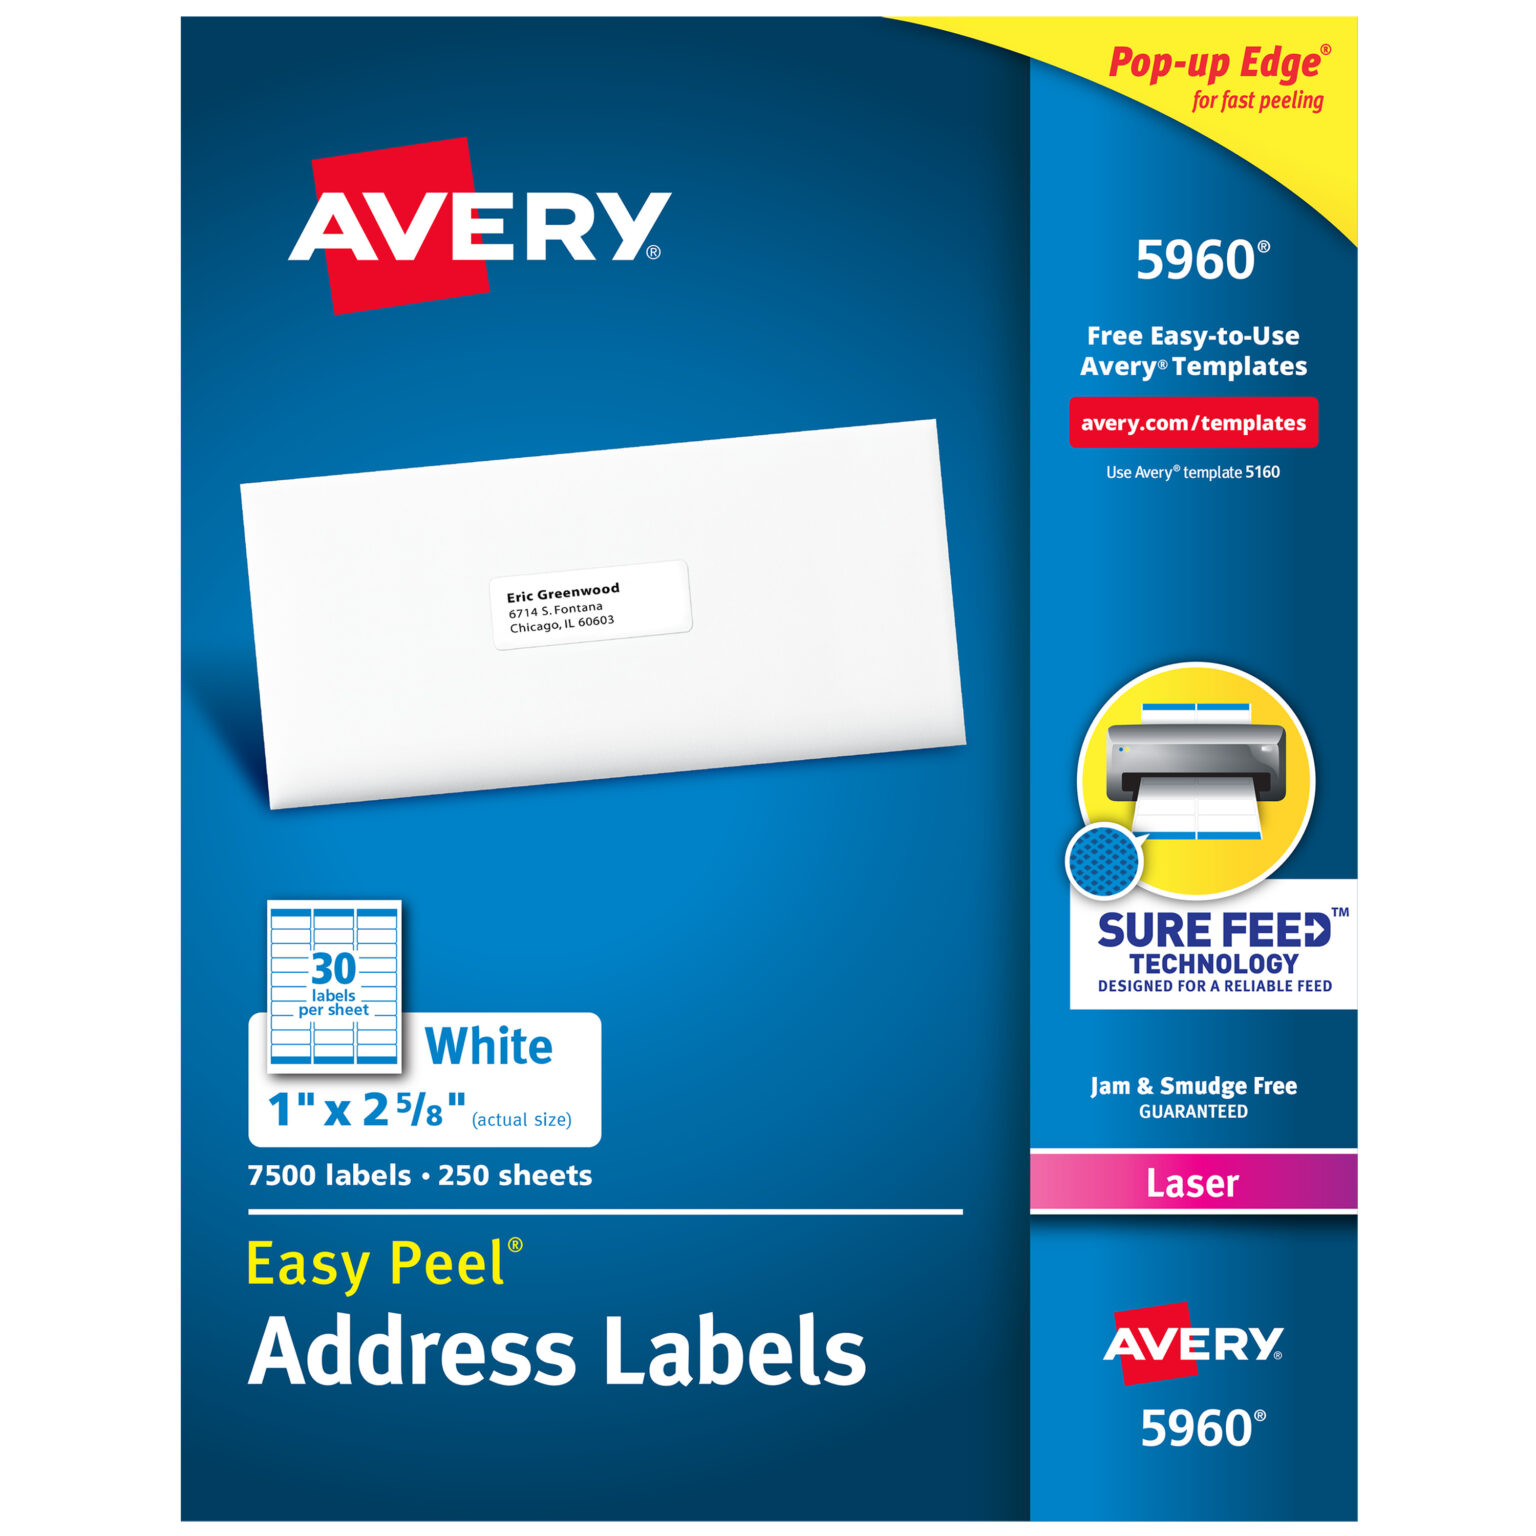 avery-labels-5960-colona-rsd7-in-office-depot-label-templates-best